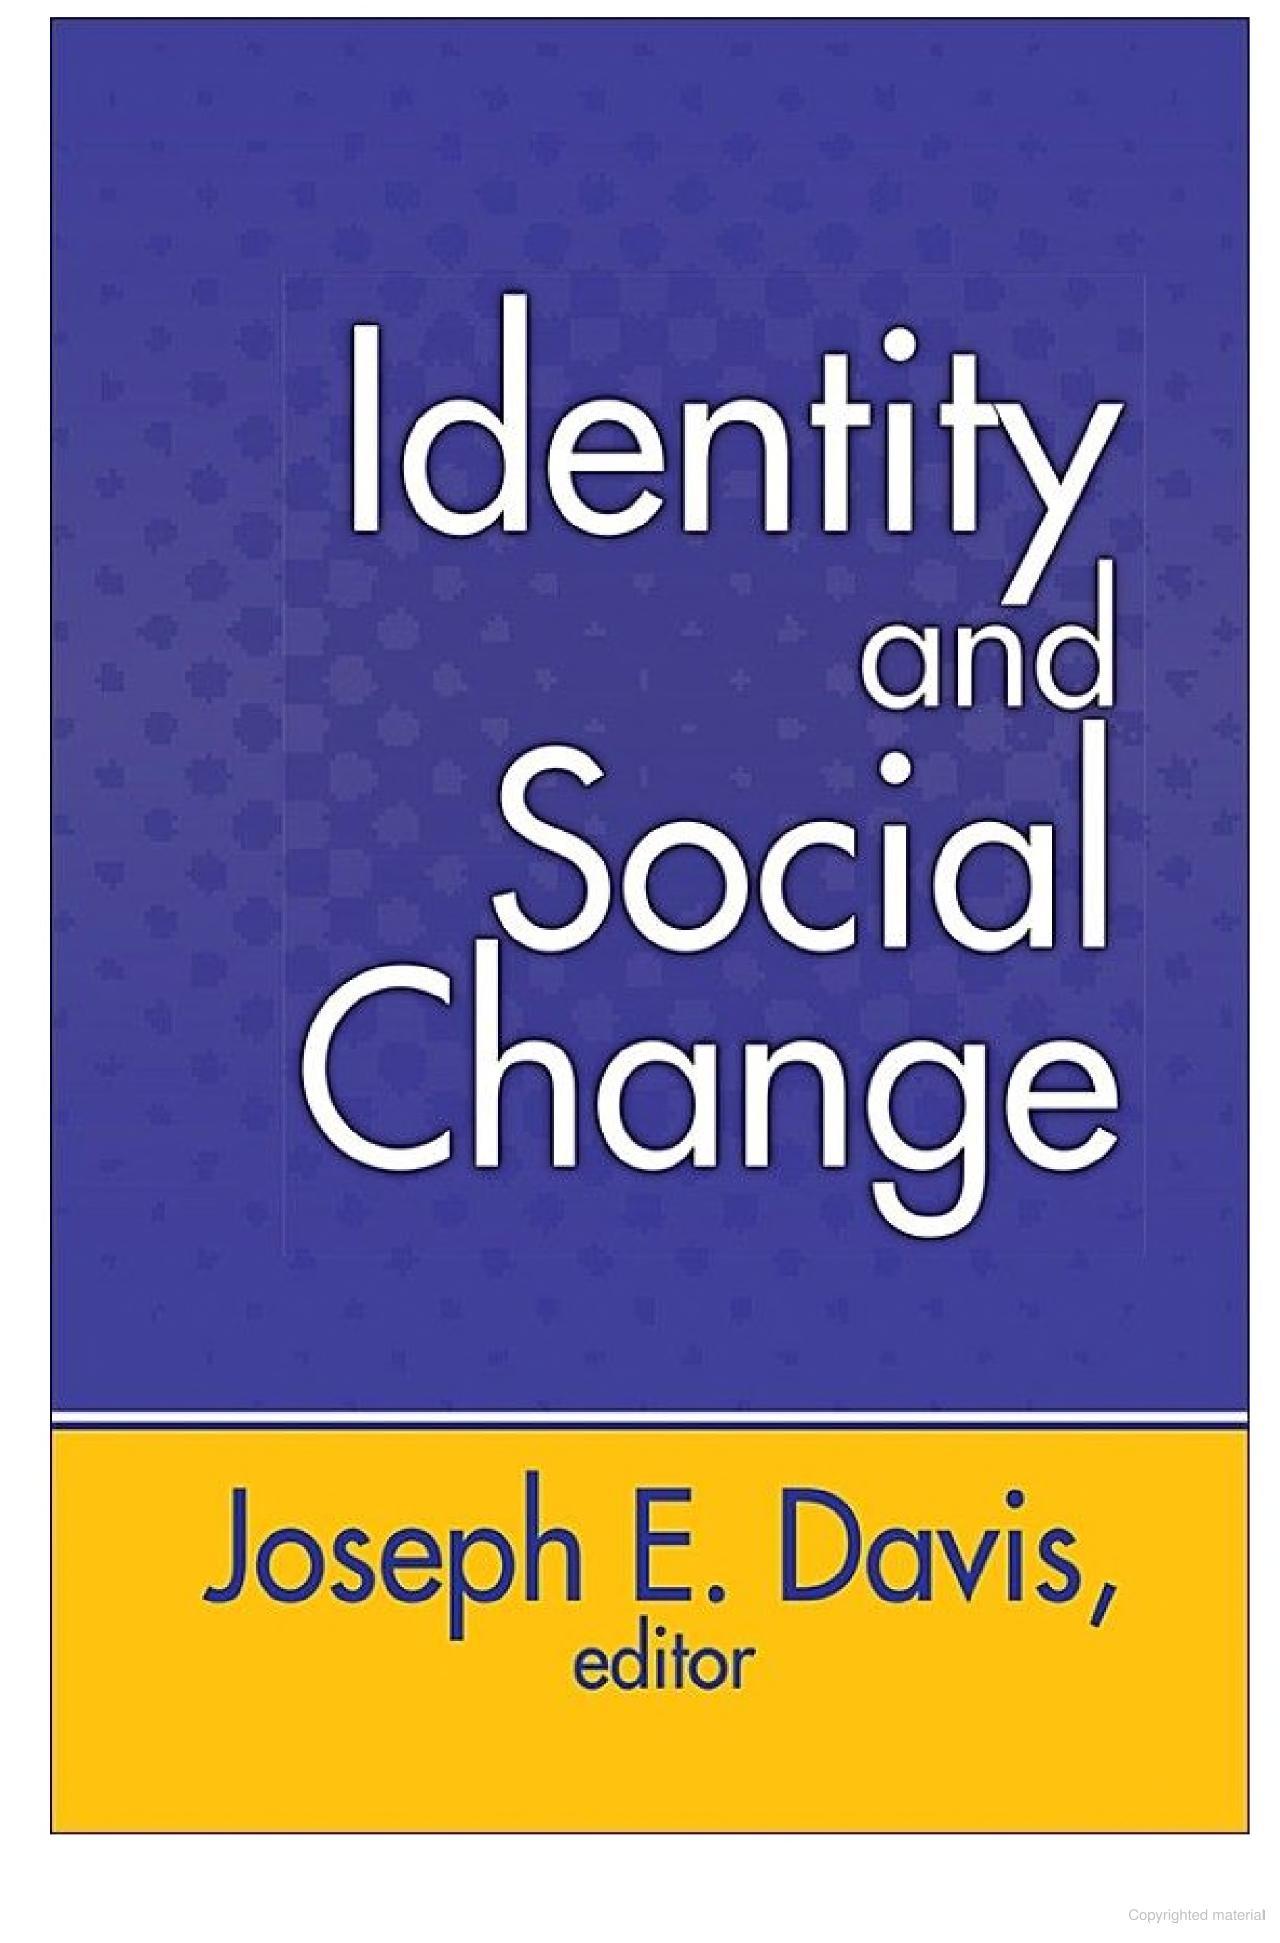 Identity and Social Change